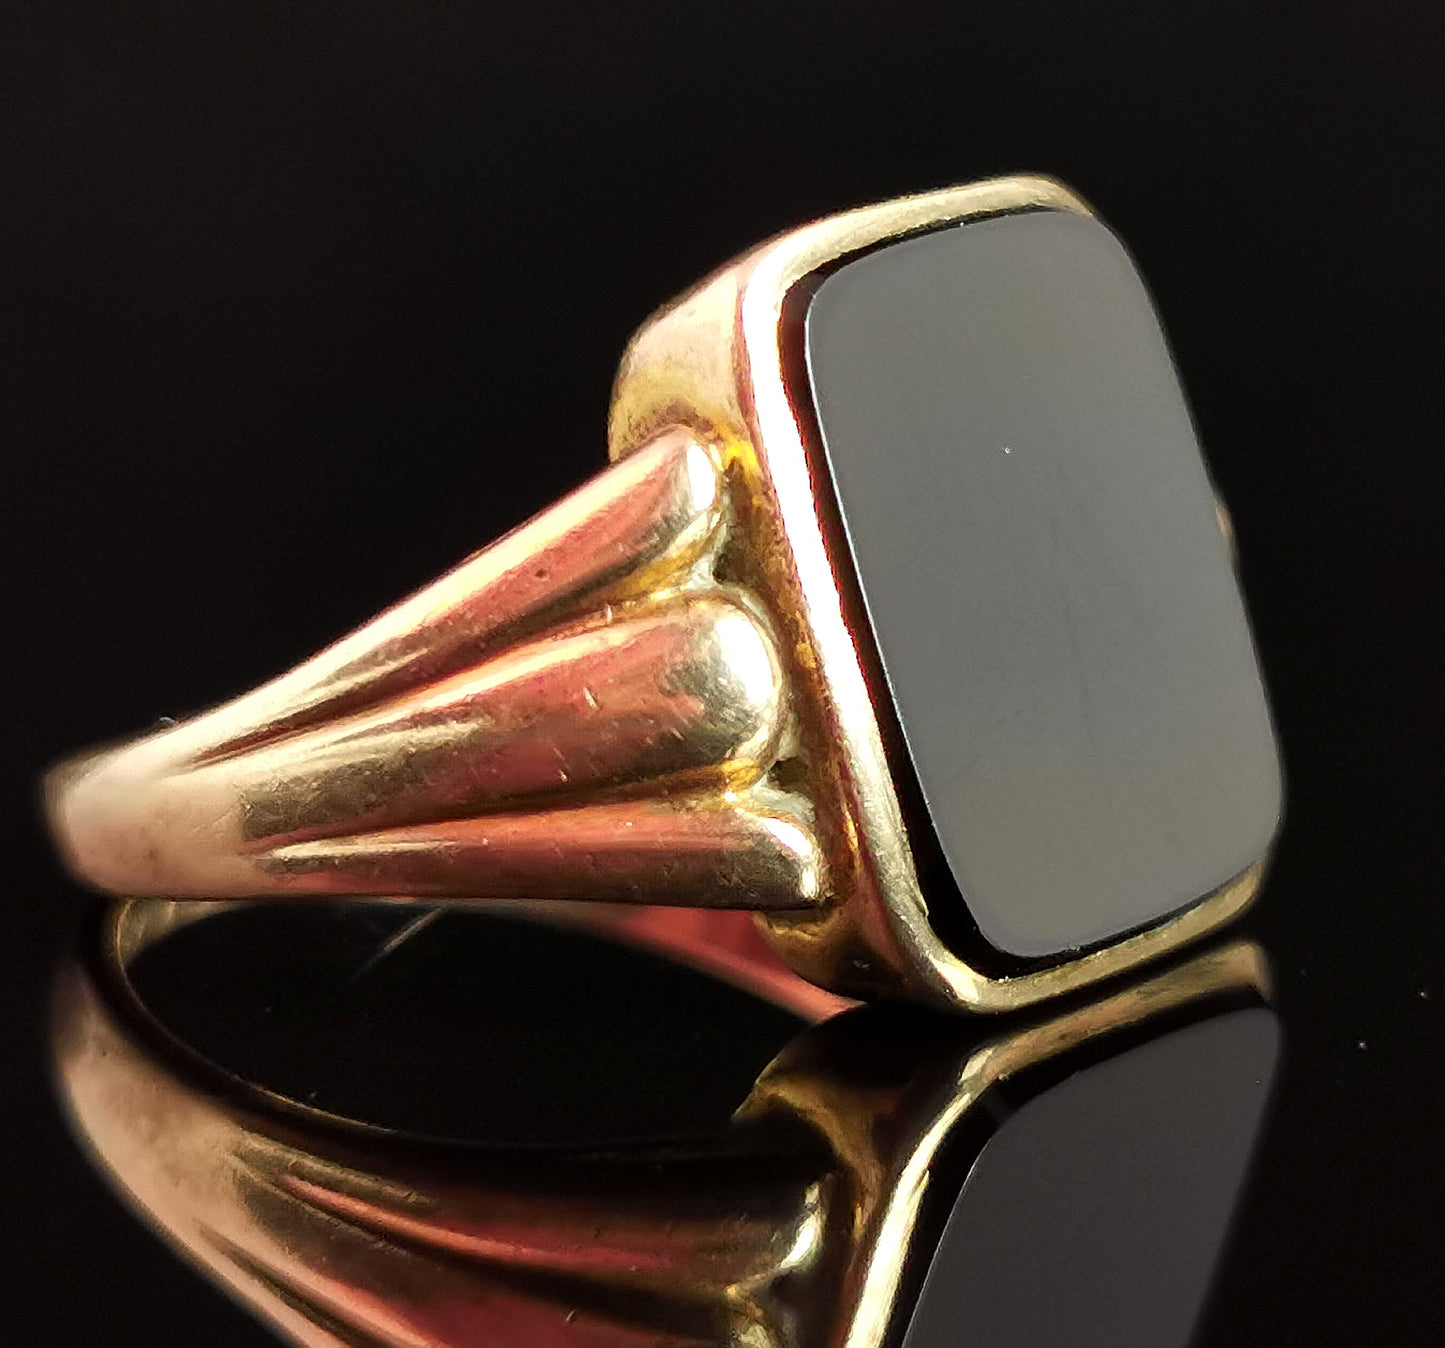 Vintage onyx signet ring, 9ct gold, pinky ring